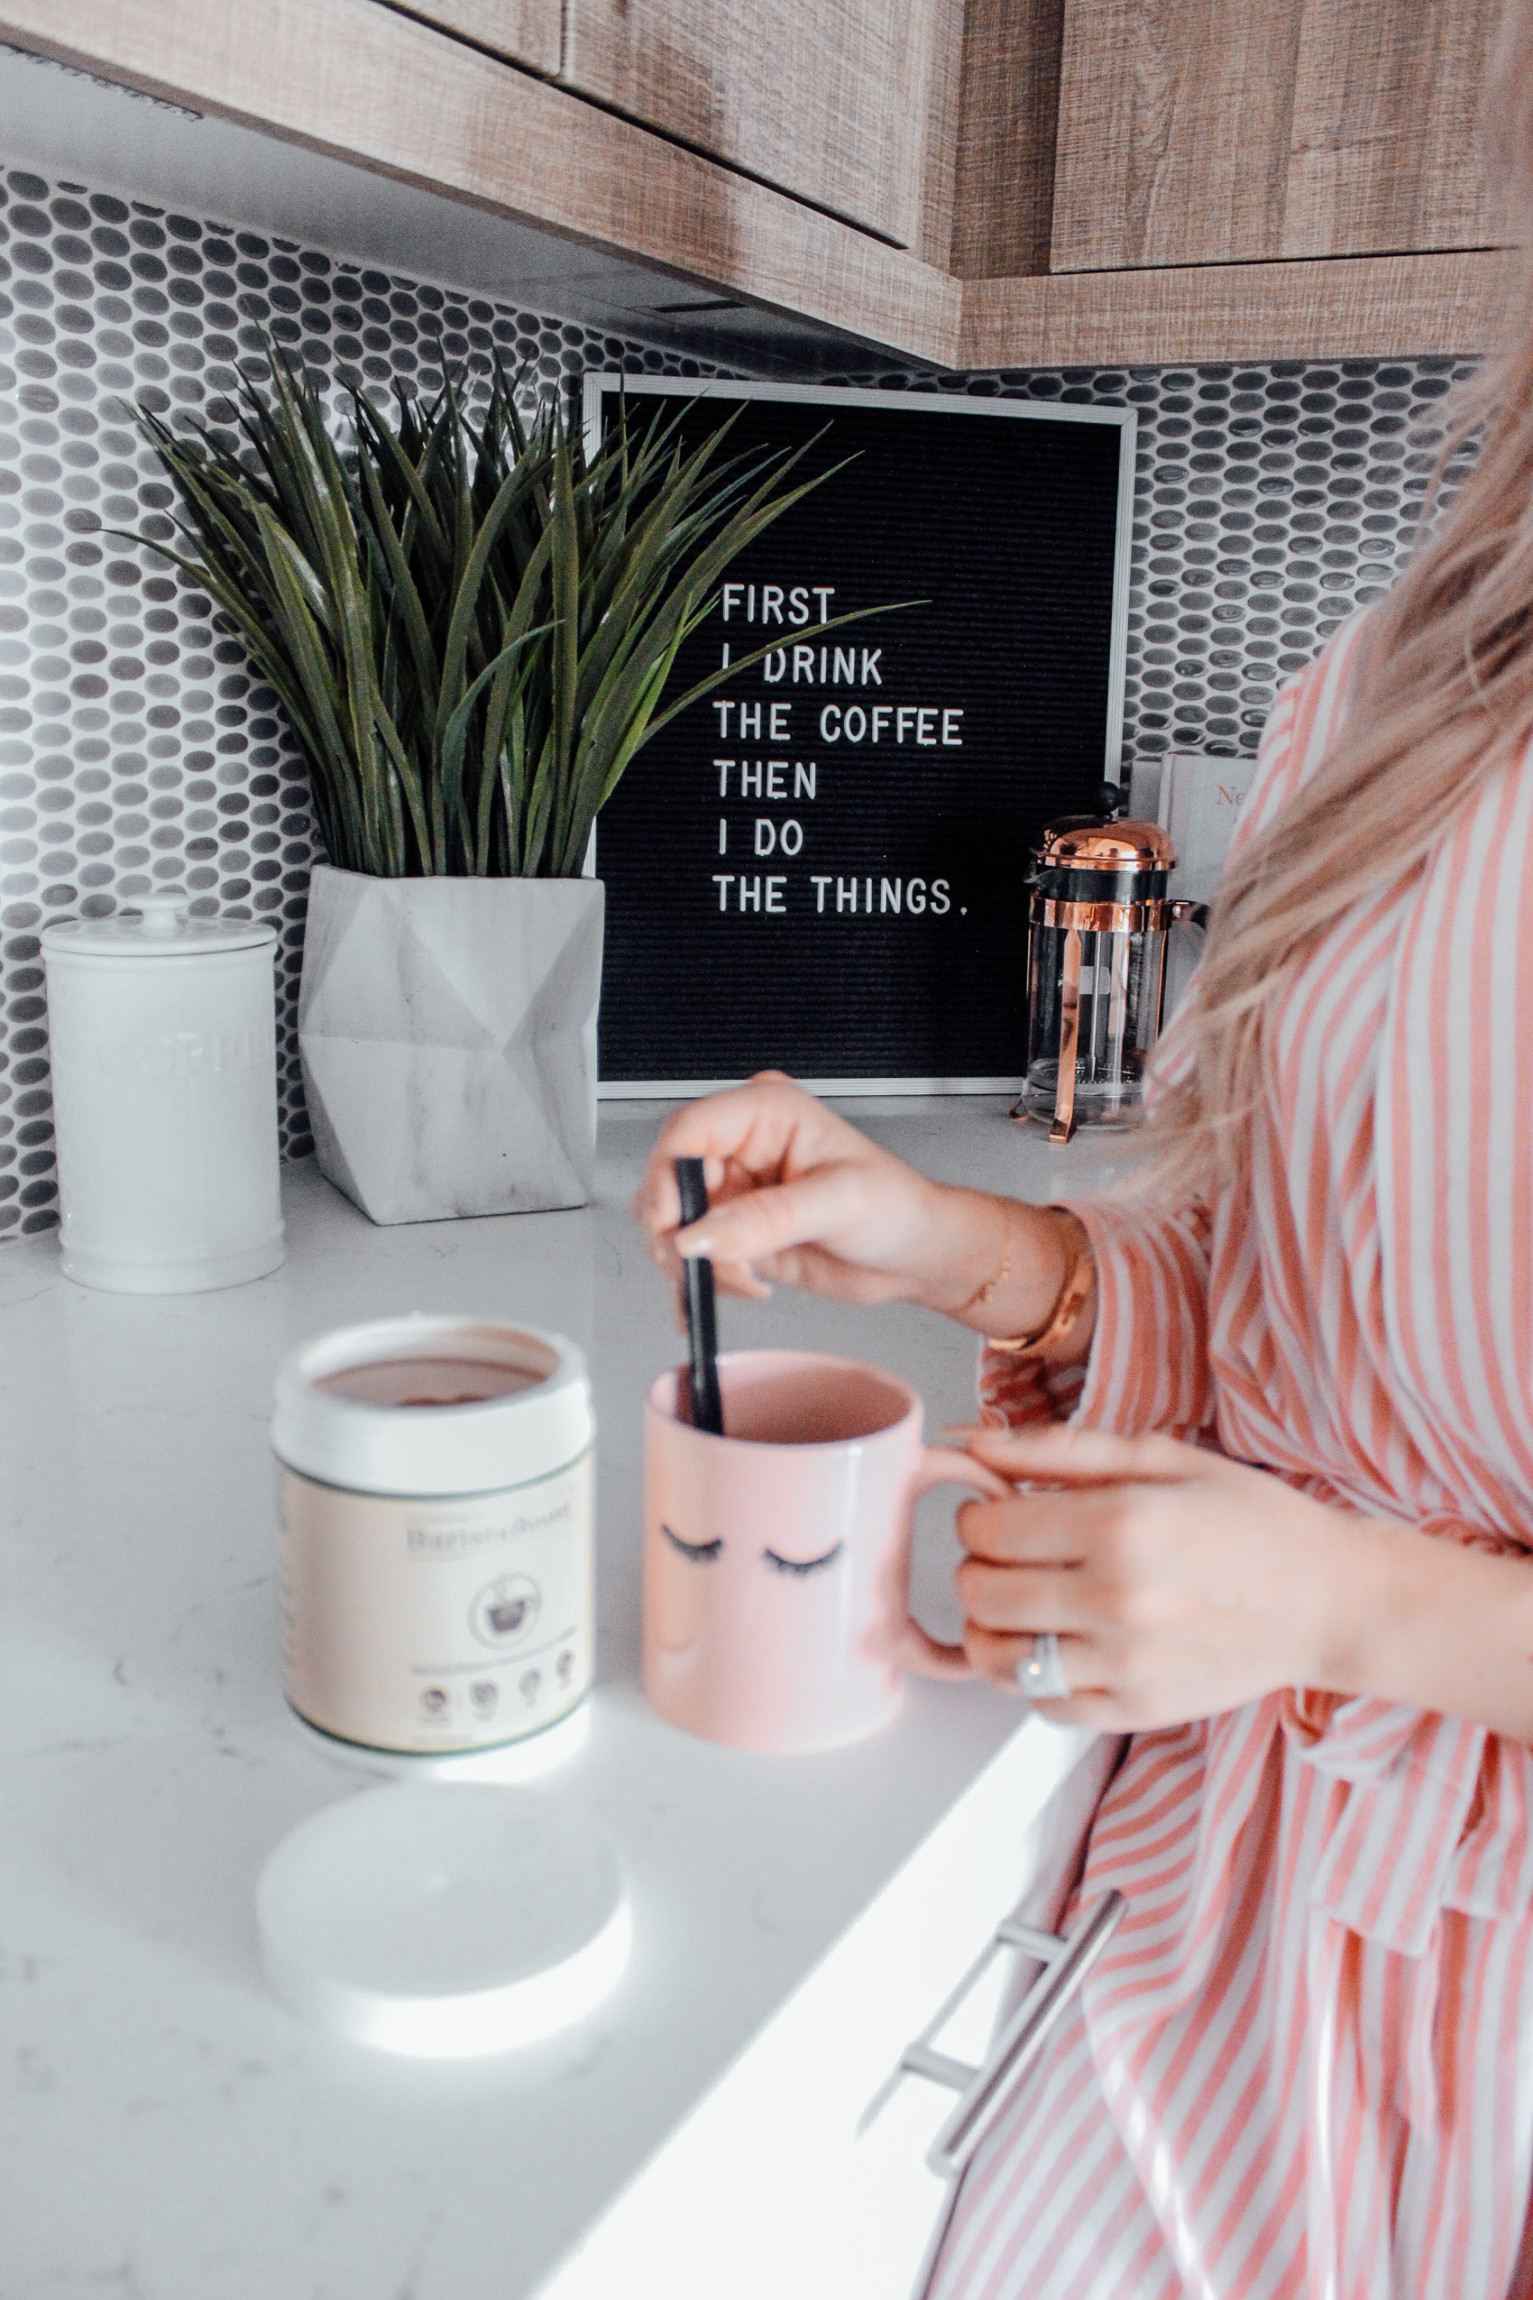 All About Barista Boost - Why I'm Obsessed & Why You Will be Too | Morning Coffee | Blondie in the City by Hayley Larue